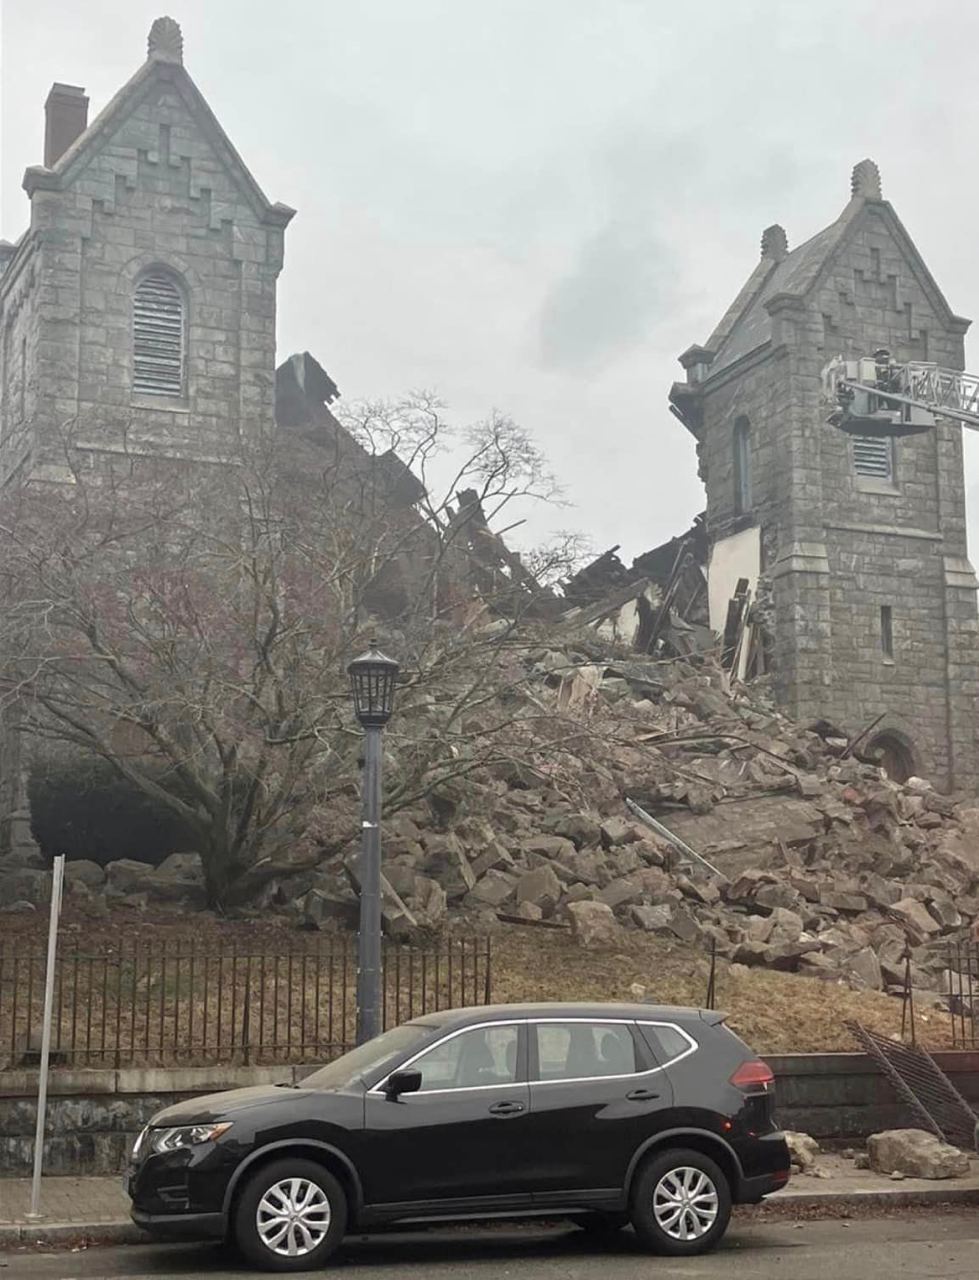 Ancient church's 46-meter bell tower suddenly collapses in the USA: a woman was inside